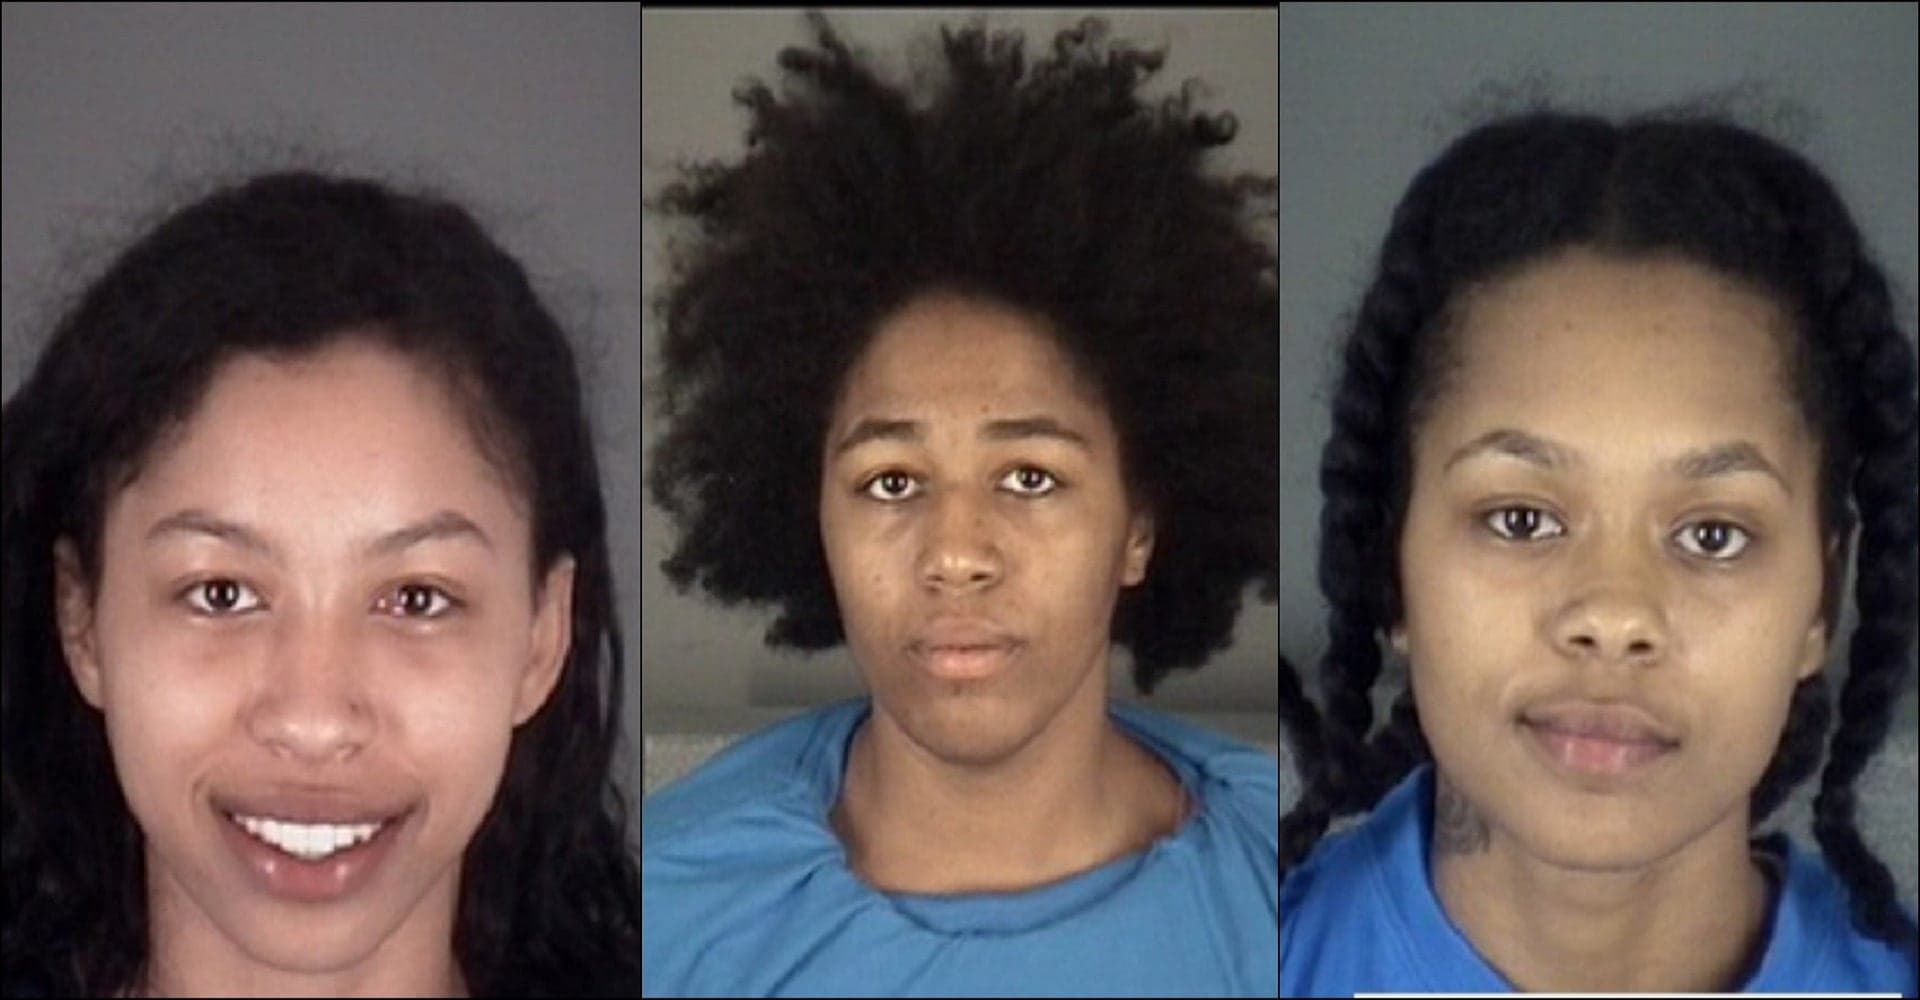 Naked Florida Women ‘Air Drying’ in Nissan Sentra Arrested After Leading Cops on High-Speed Chase